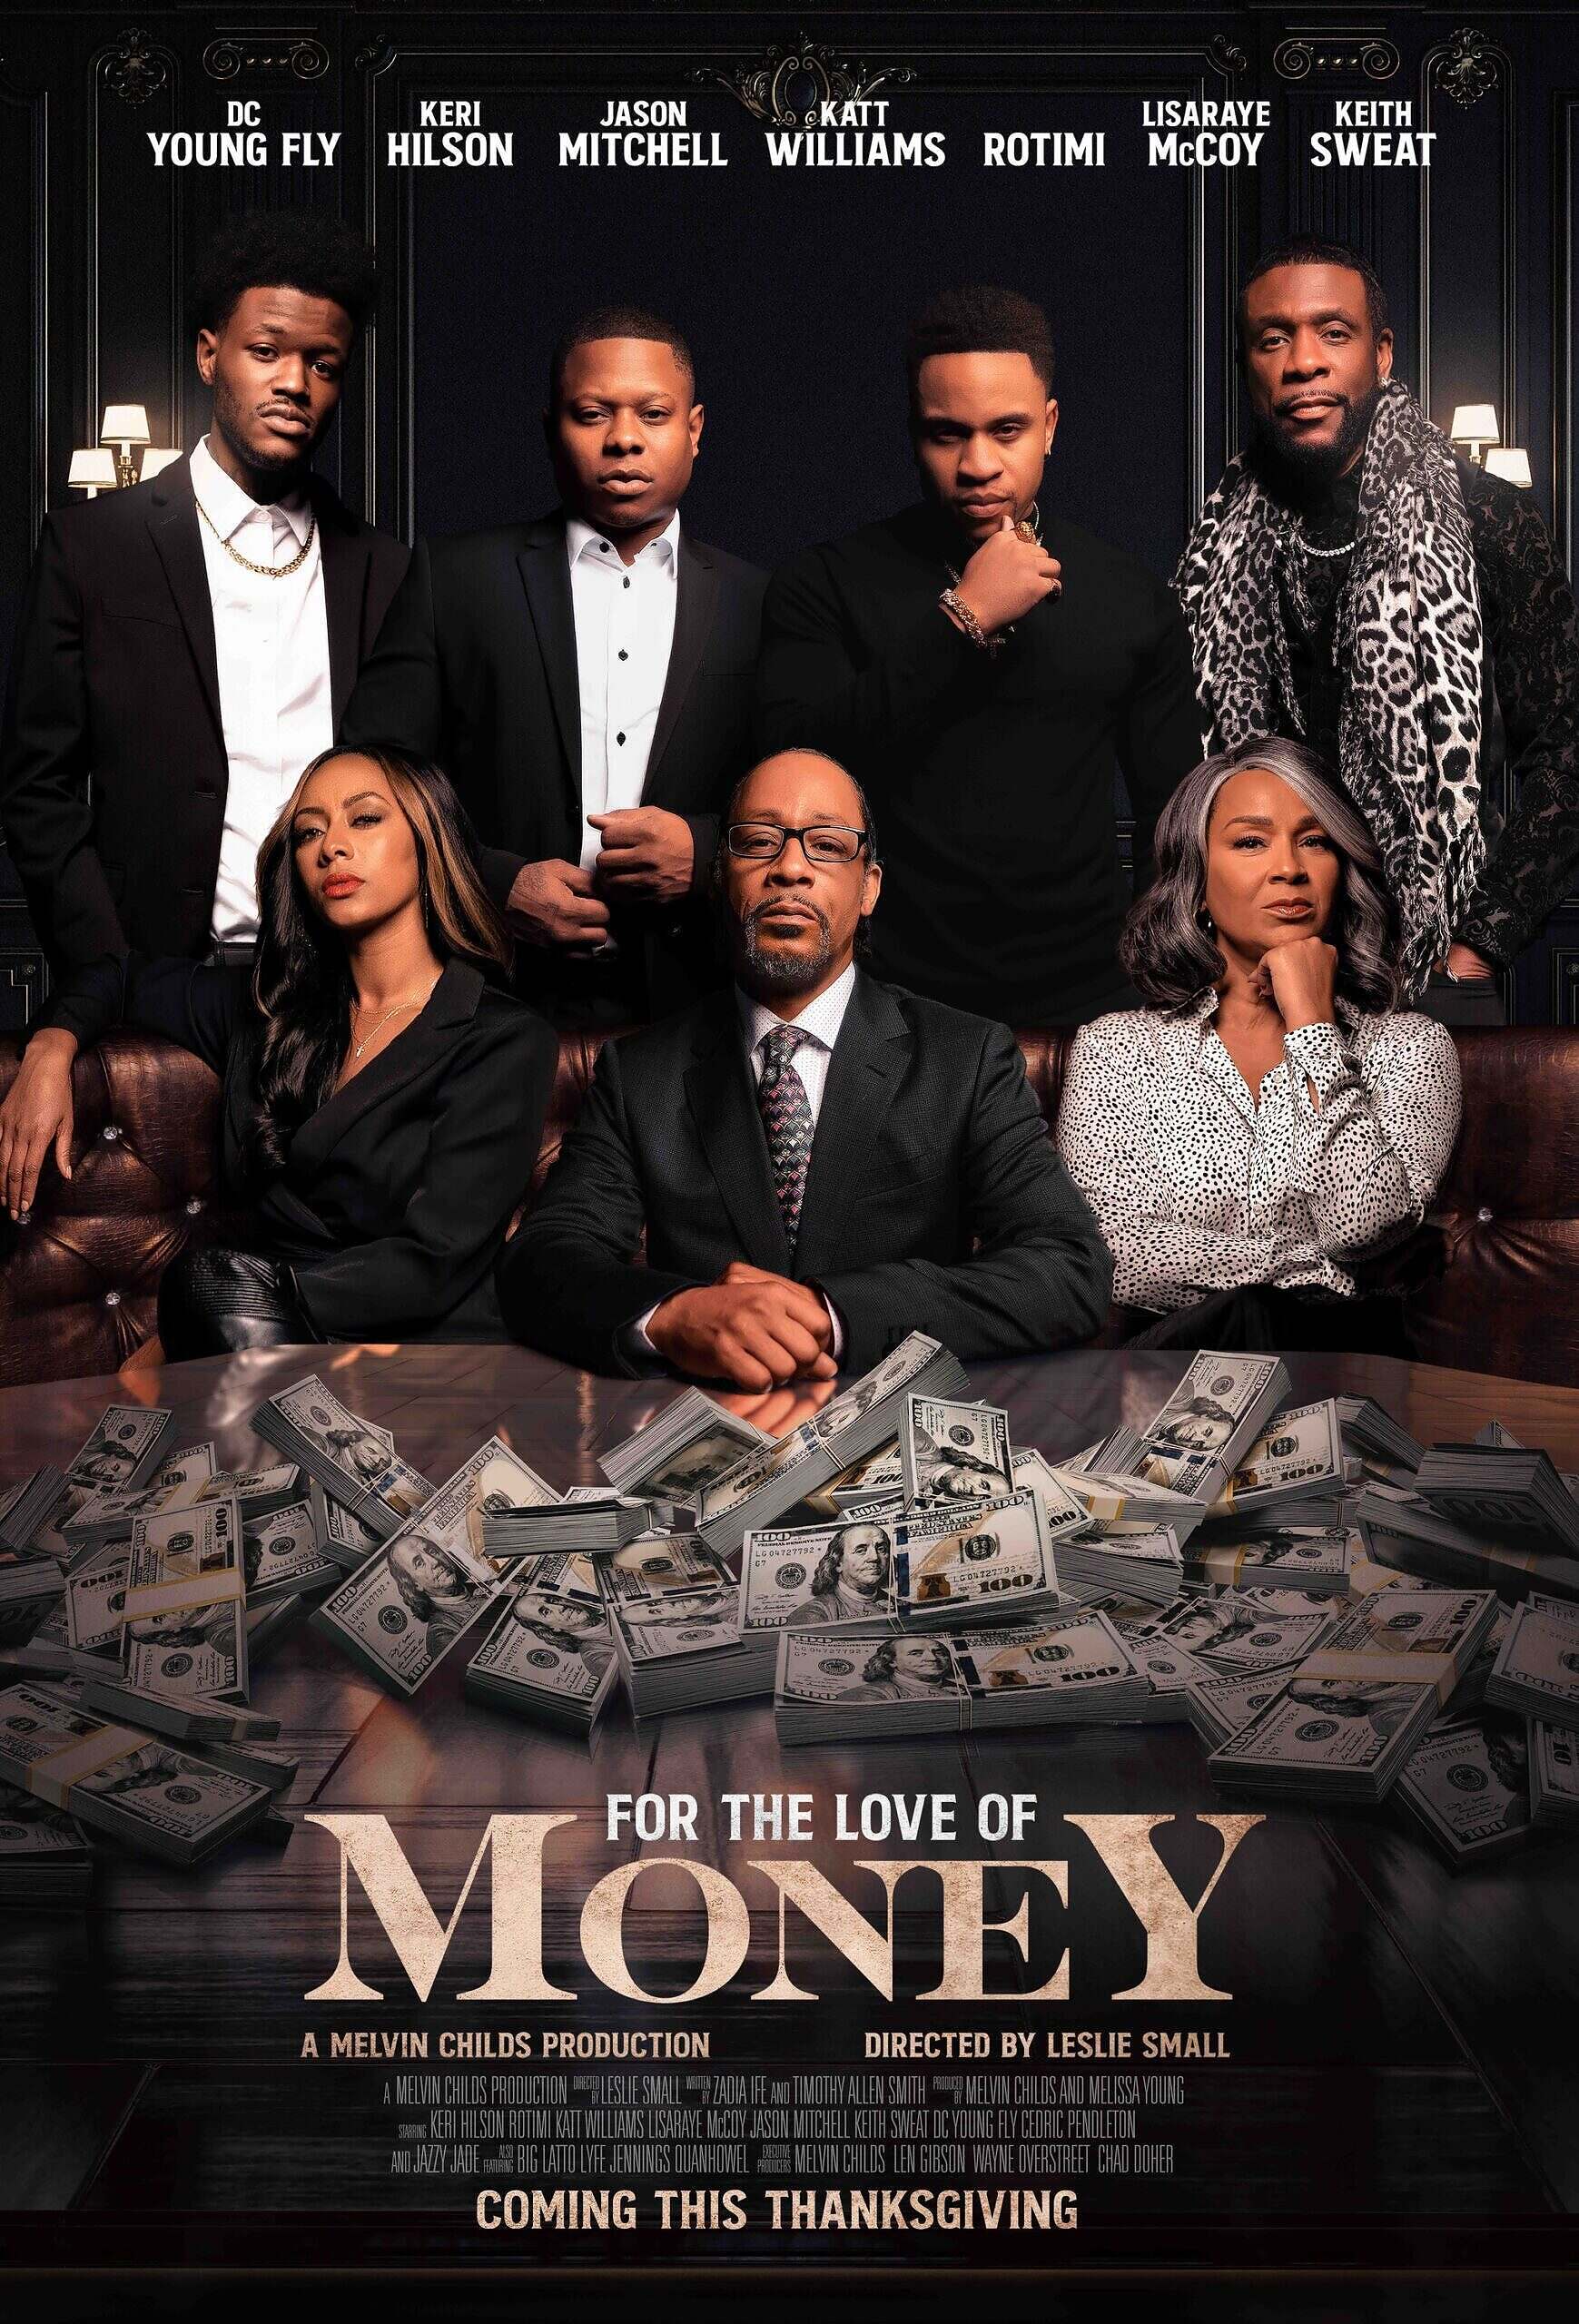 1st Trailer For ‘Melvin Childs’ For The Love Of Money’ Movie Starring Keri Hilson, DC Young Fly, & Keith Sweat